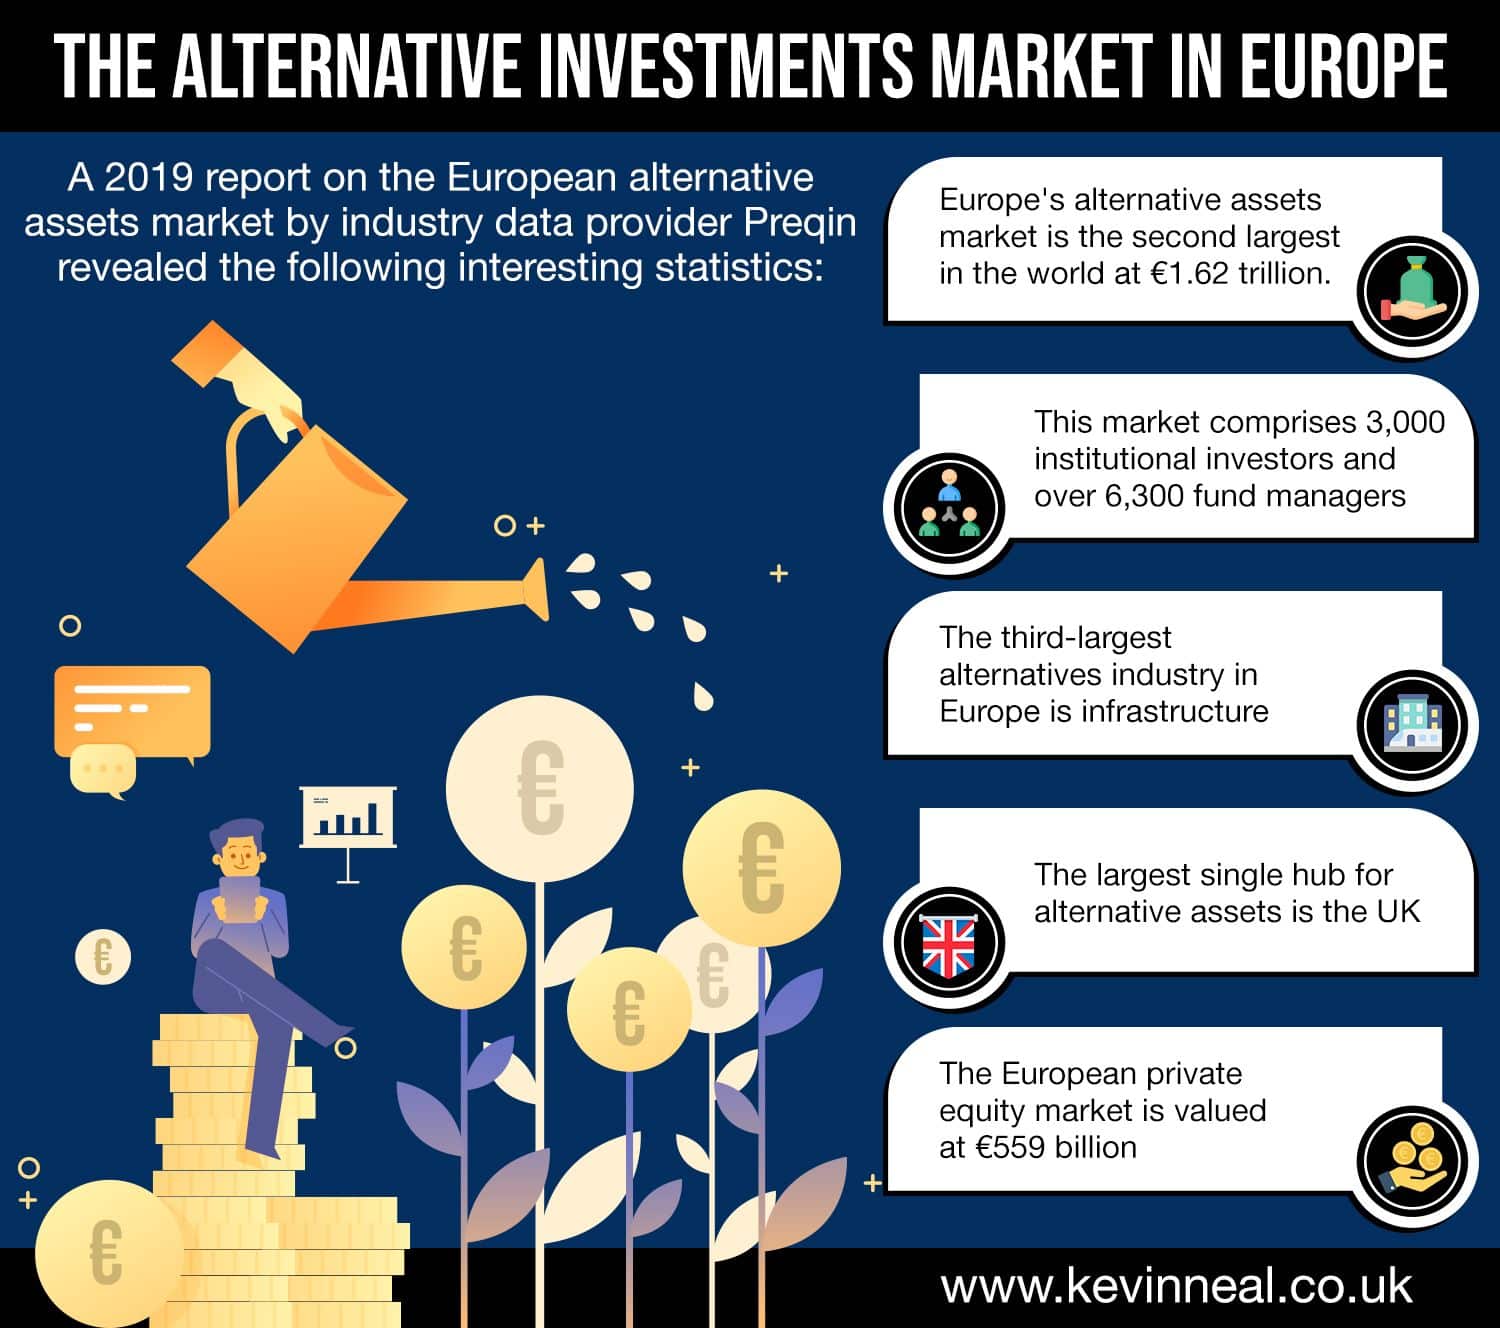 The Alternative Investments Market in Europe